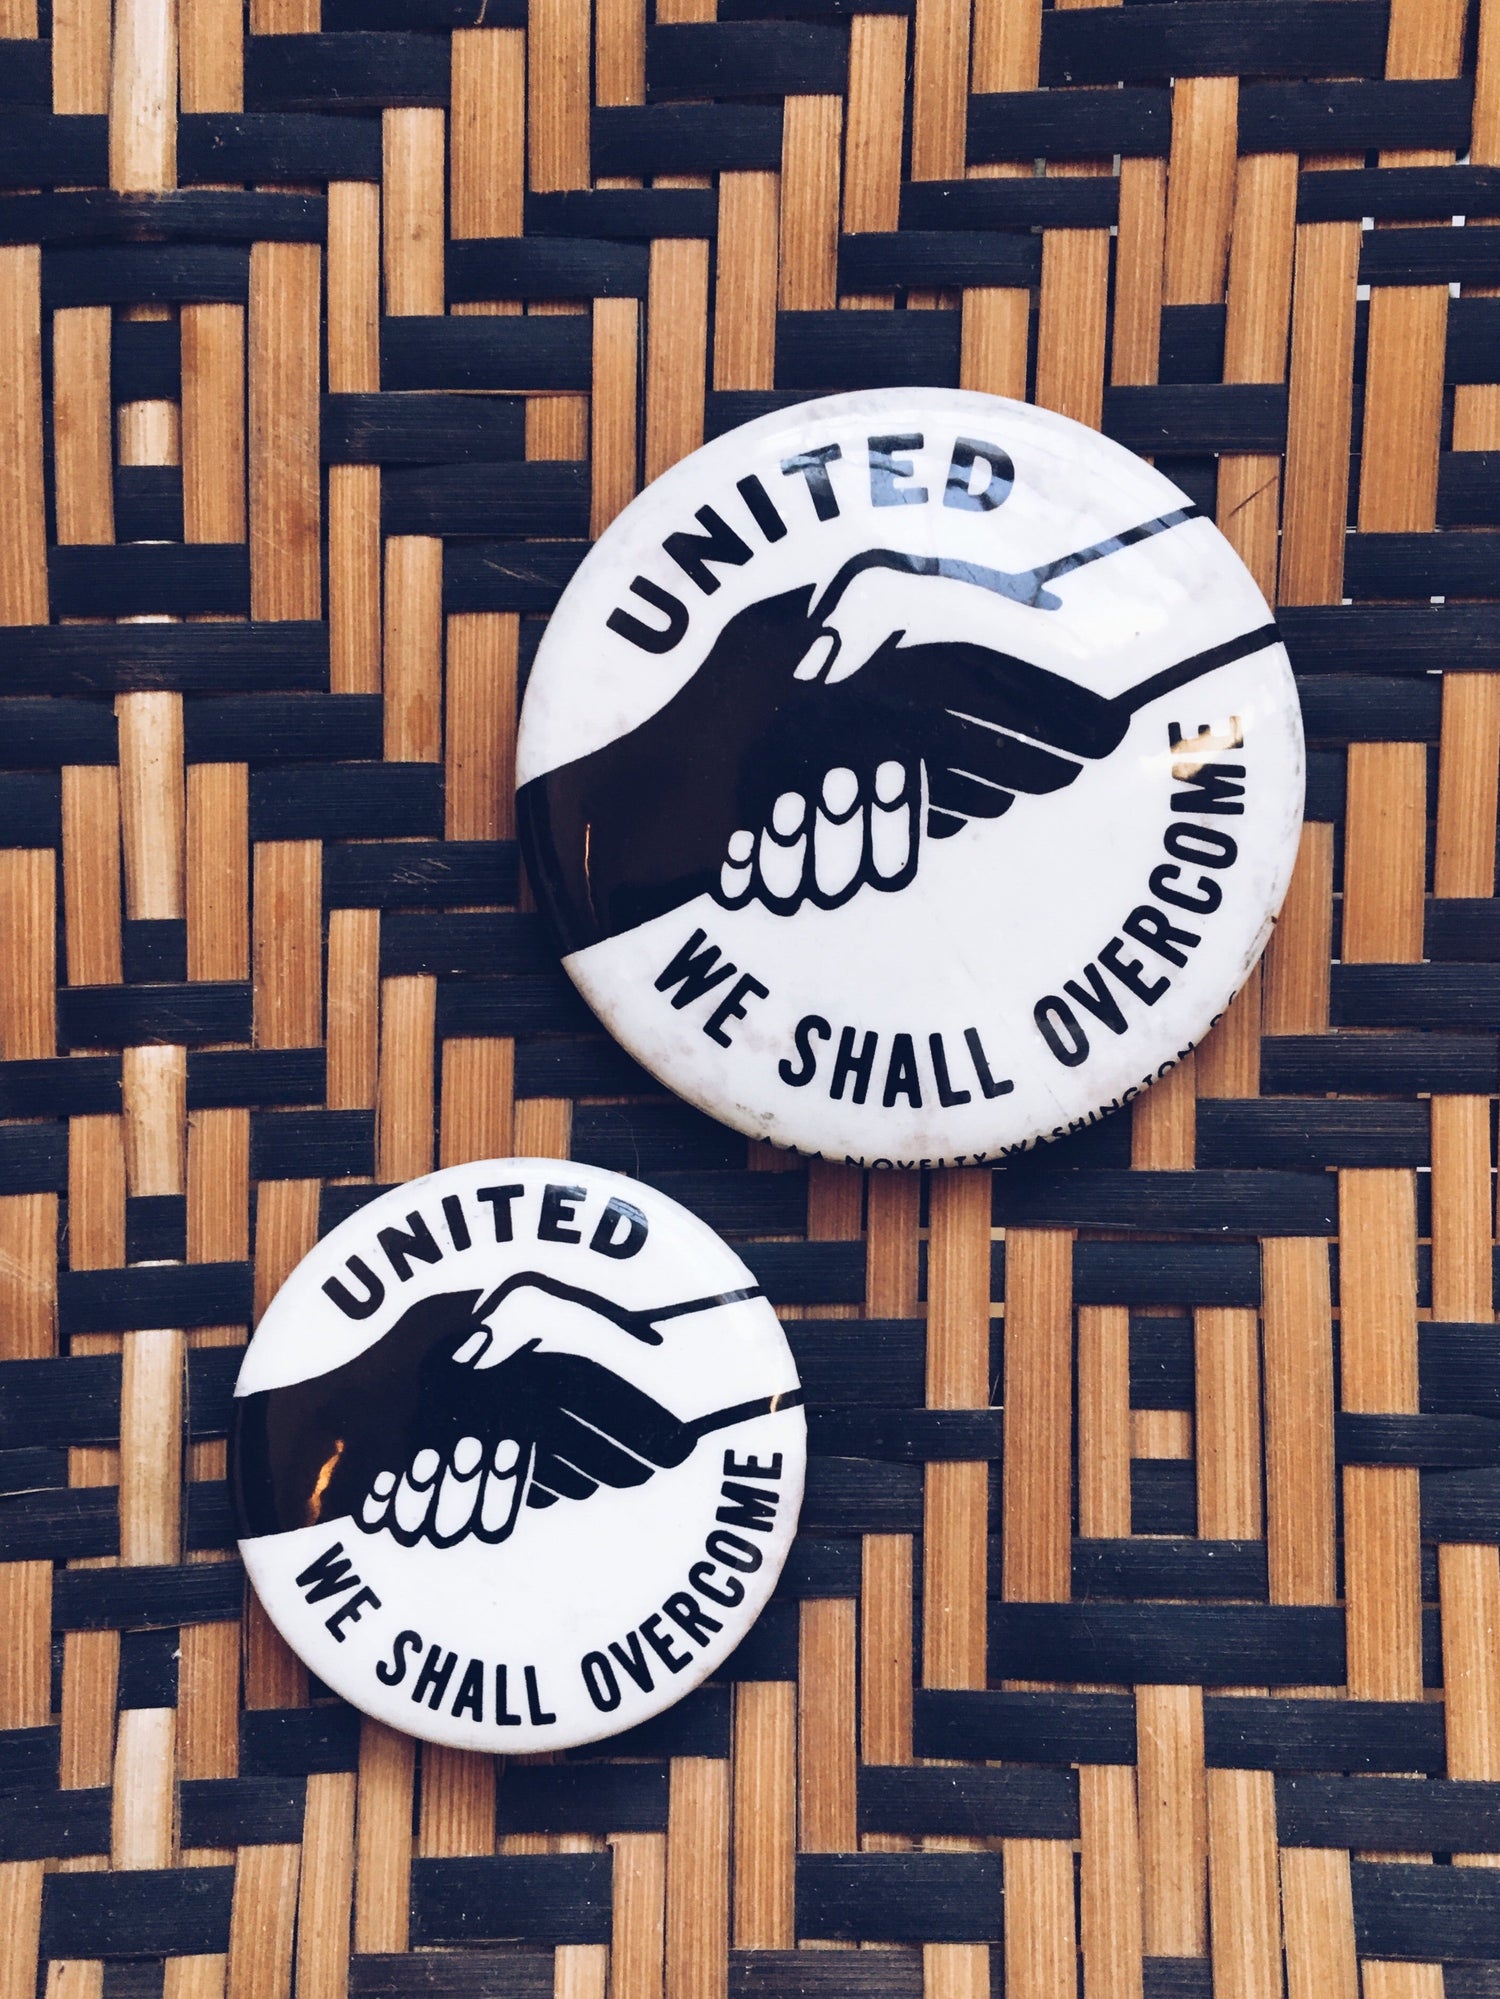 Vintage “We Shall Overcome” Pinback Button (1960’s)